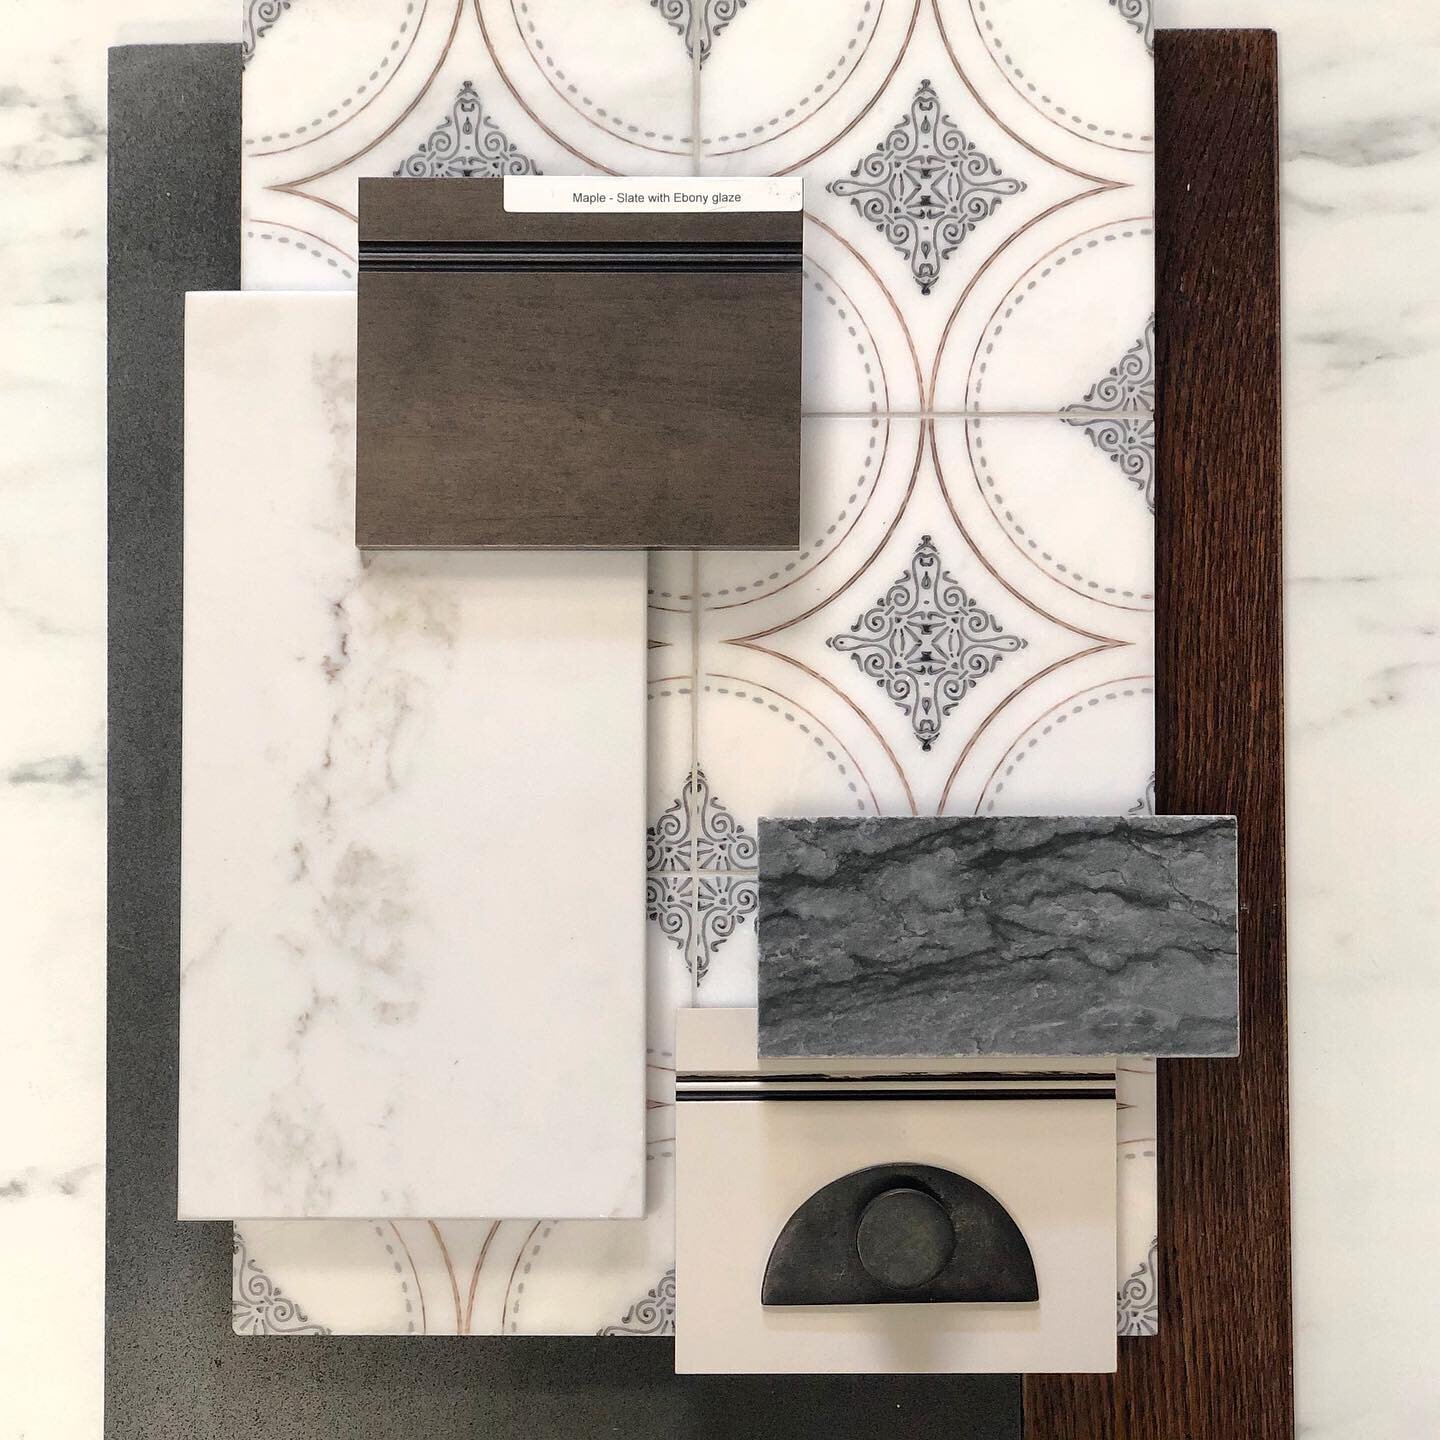 ❤️SUPER PRETTY designs coming together today @designpalmbeach! Been dying to use this @stoneimpressions tile because who doesn&rsquo;t love it?!
#designinspo #interiordesign #stoneimpressions #marble #moodboard #frenchinspired #kitchendesign